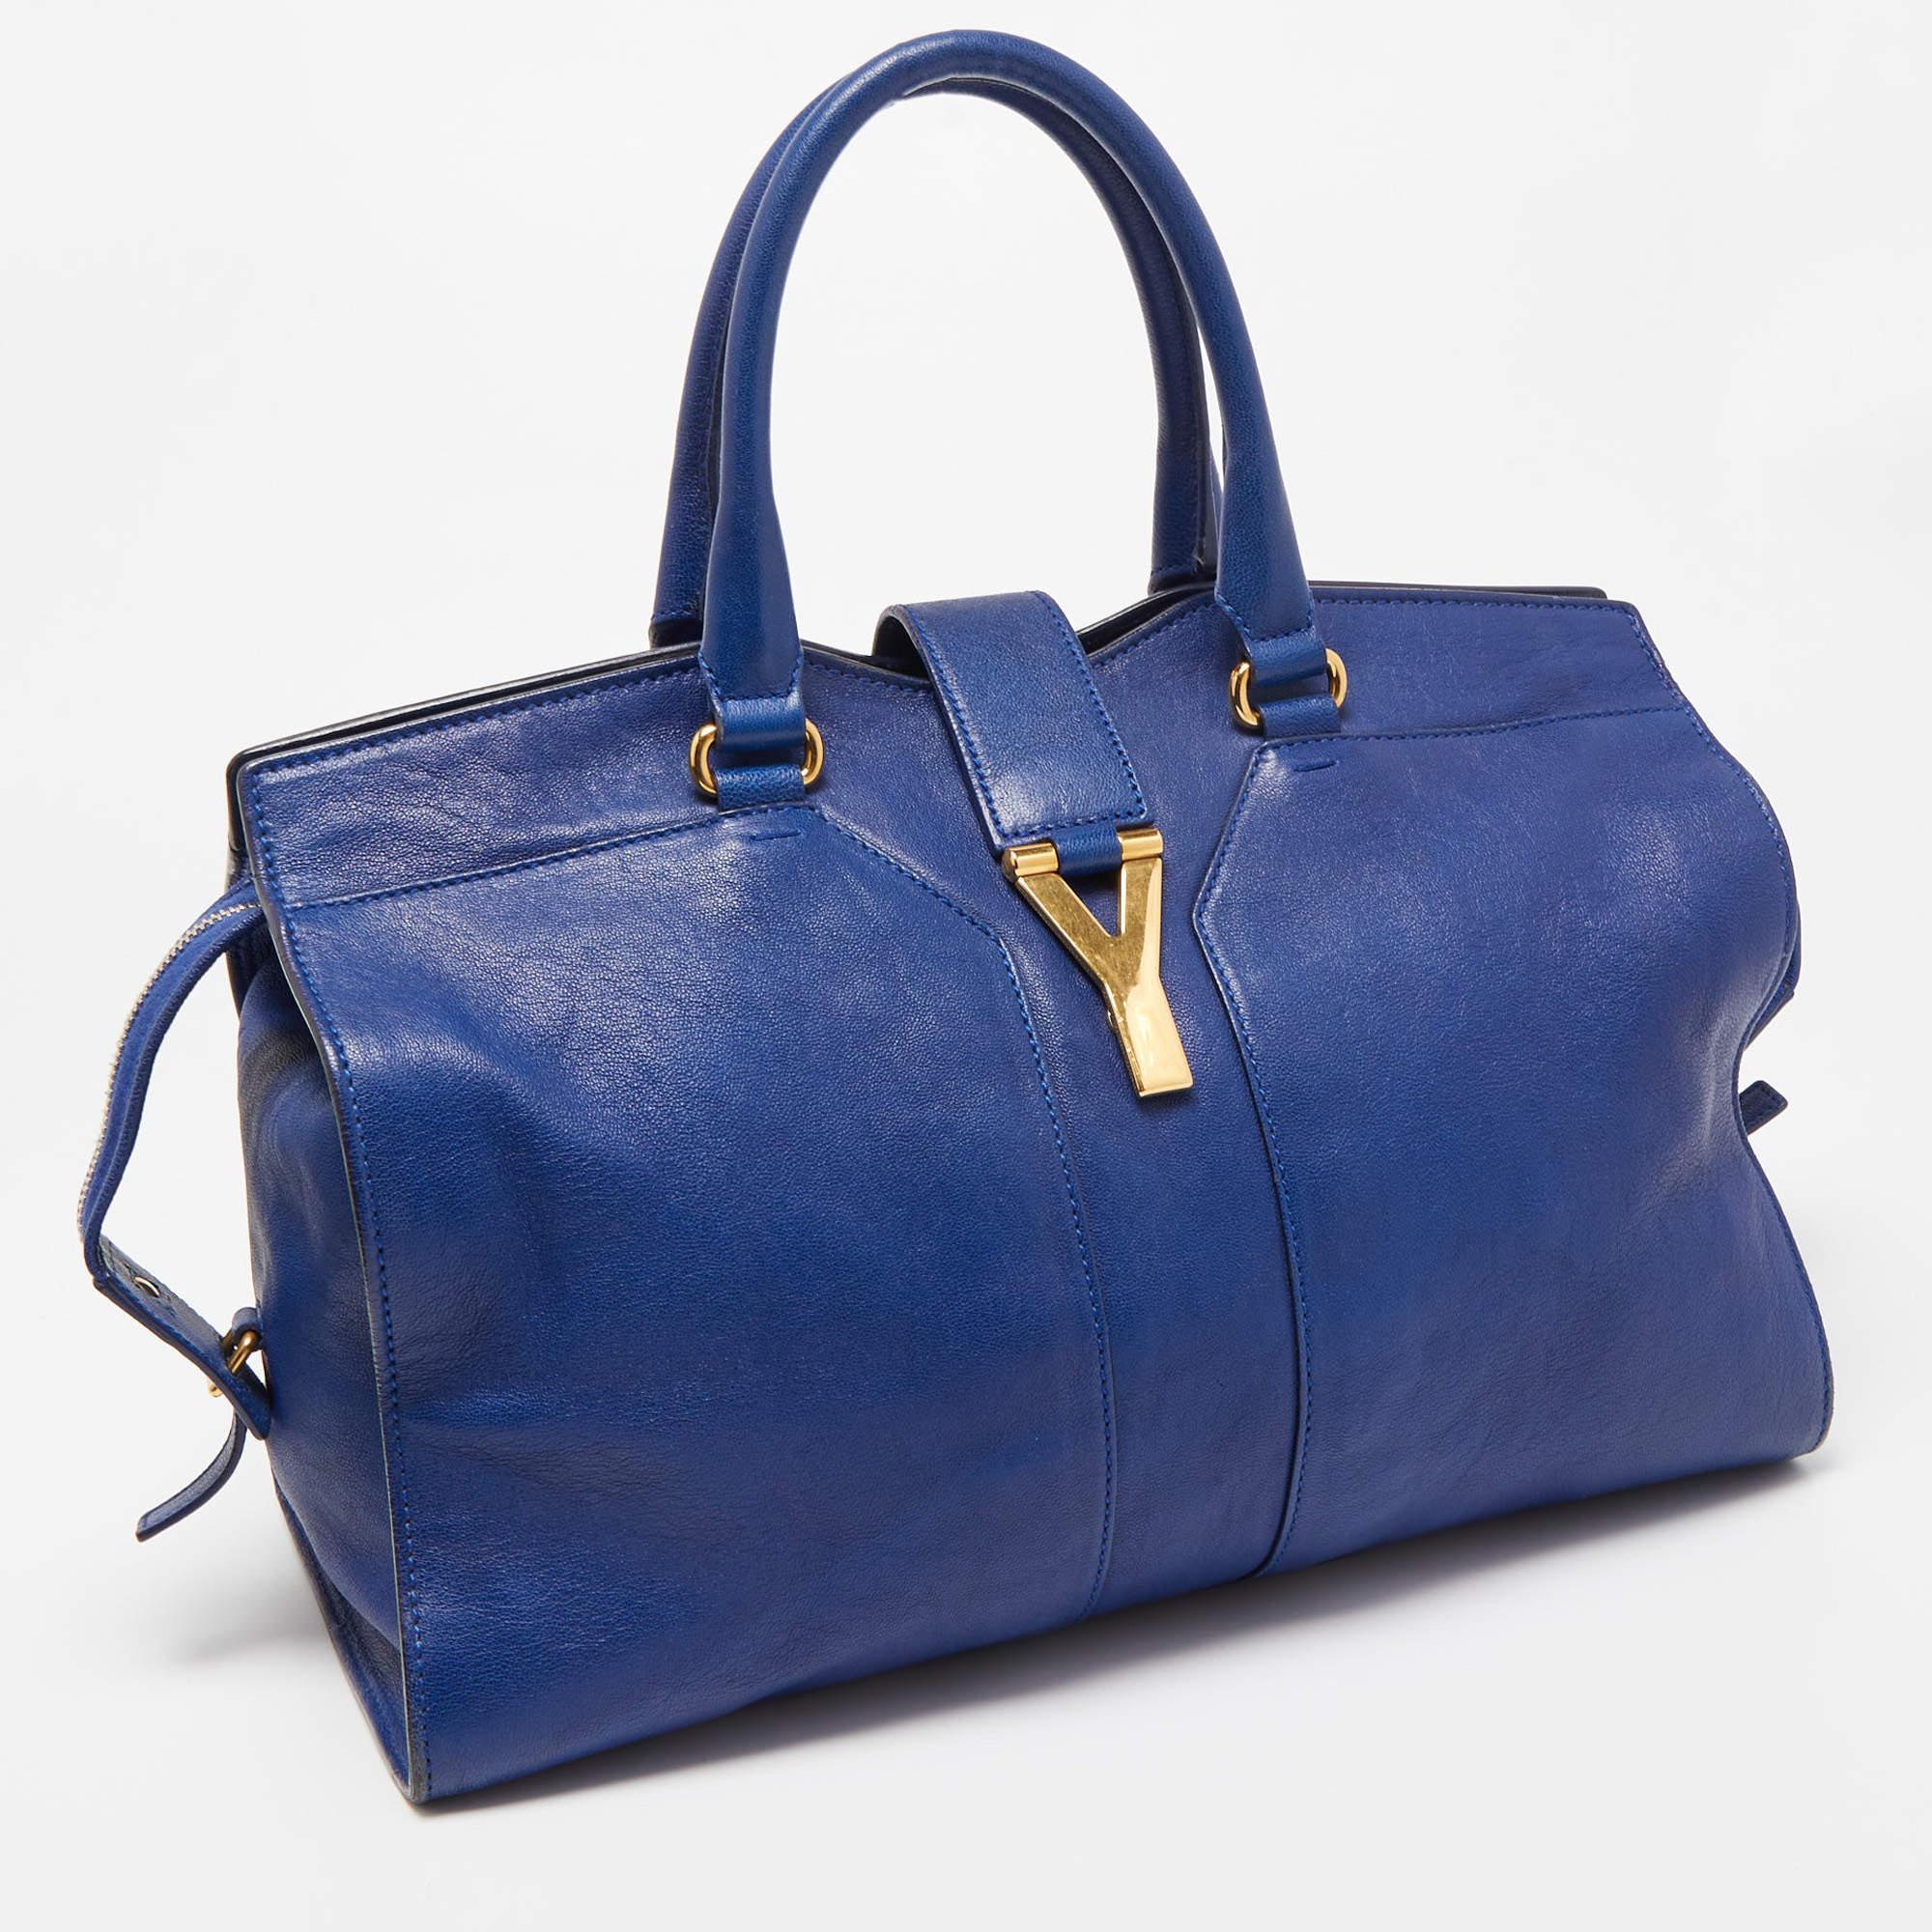 Yves Saint Laurent Blue Leather Medium Cabas Chyc Tote For Sale 11